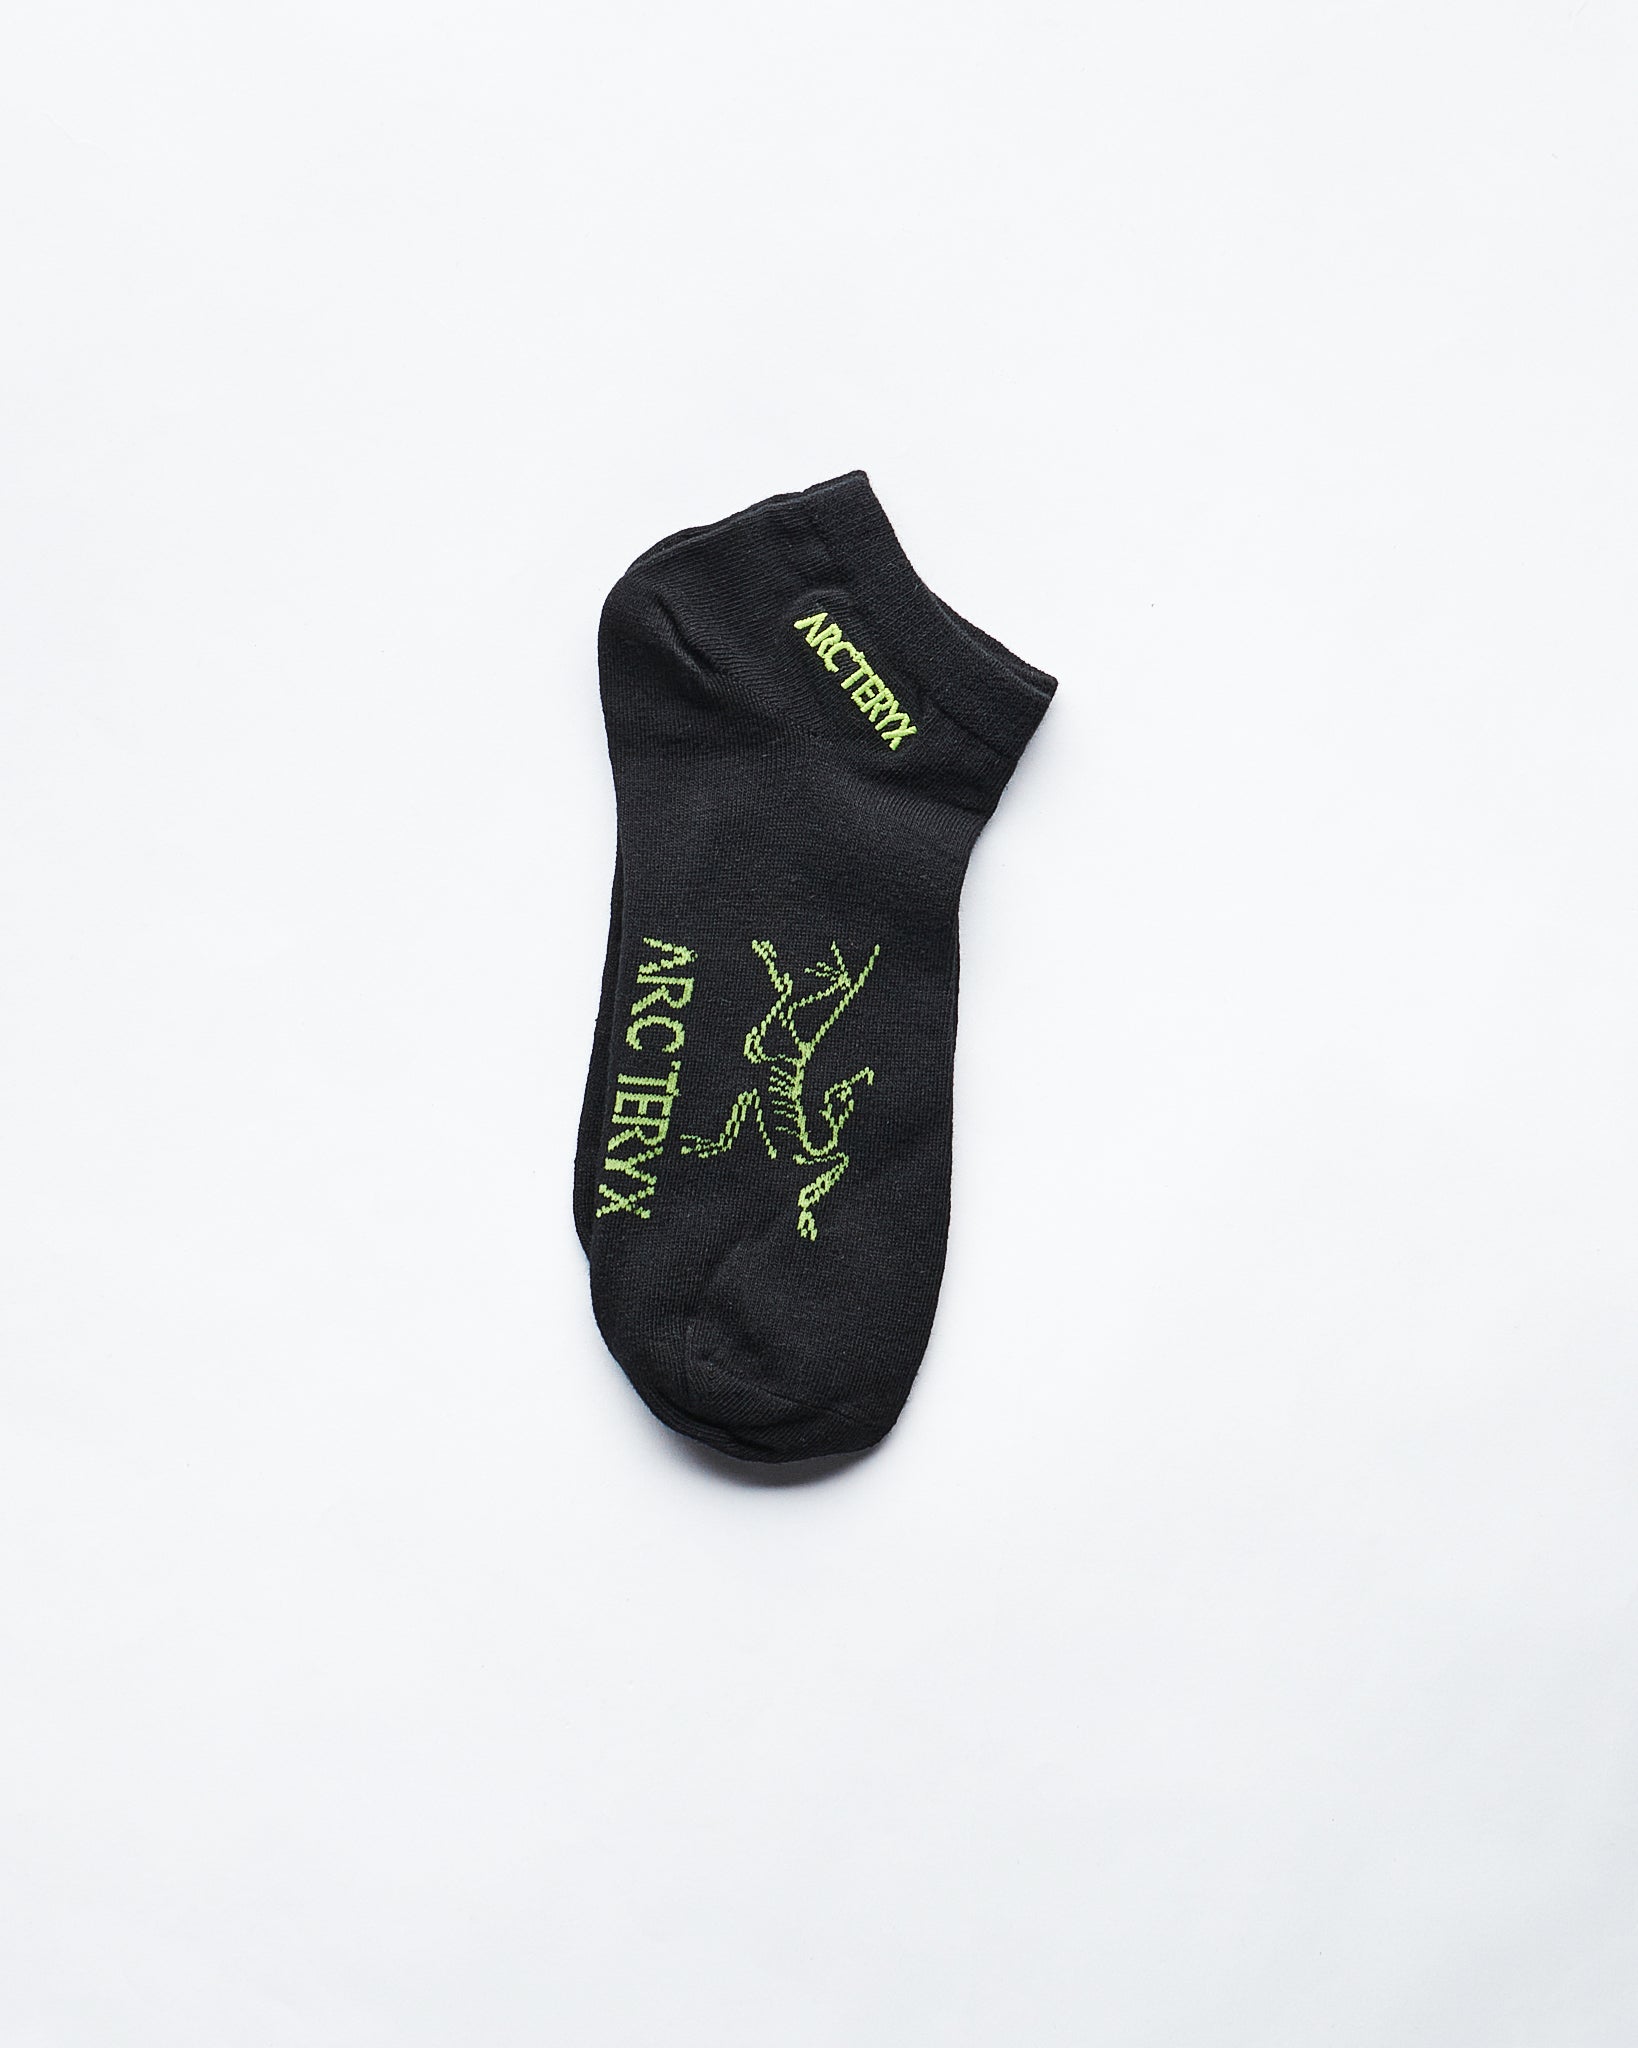 MOI OUTFIT-Arcteryx 5 Pairs Low Cut Socks 13.90